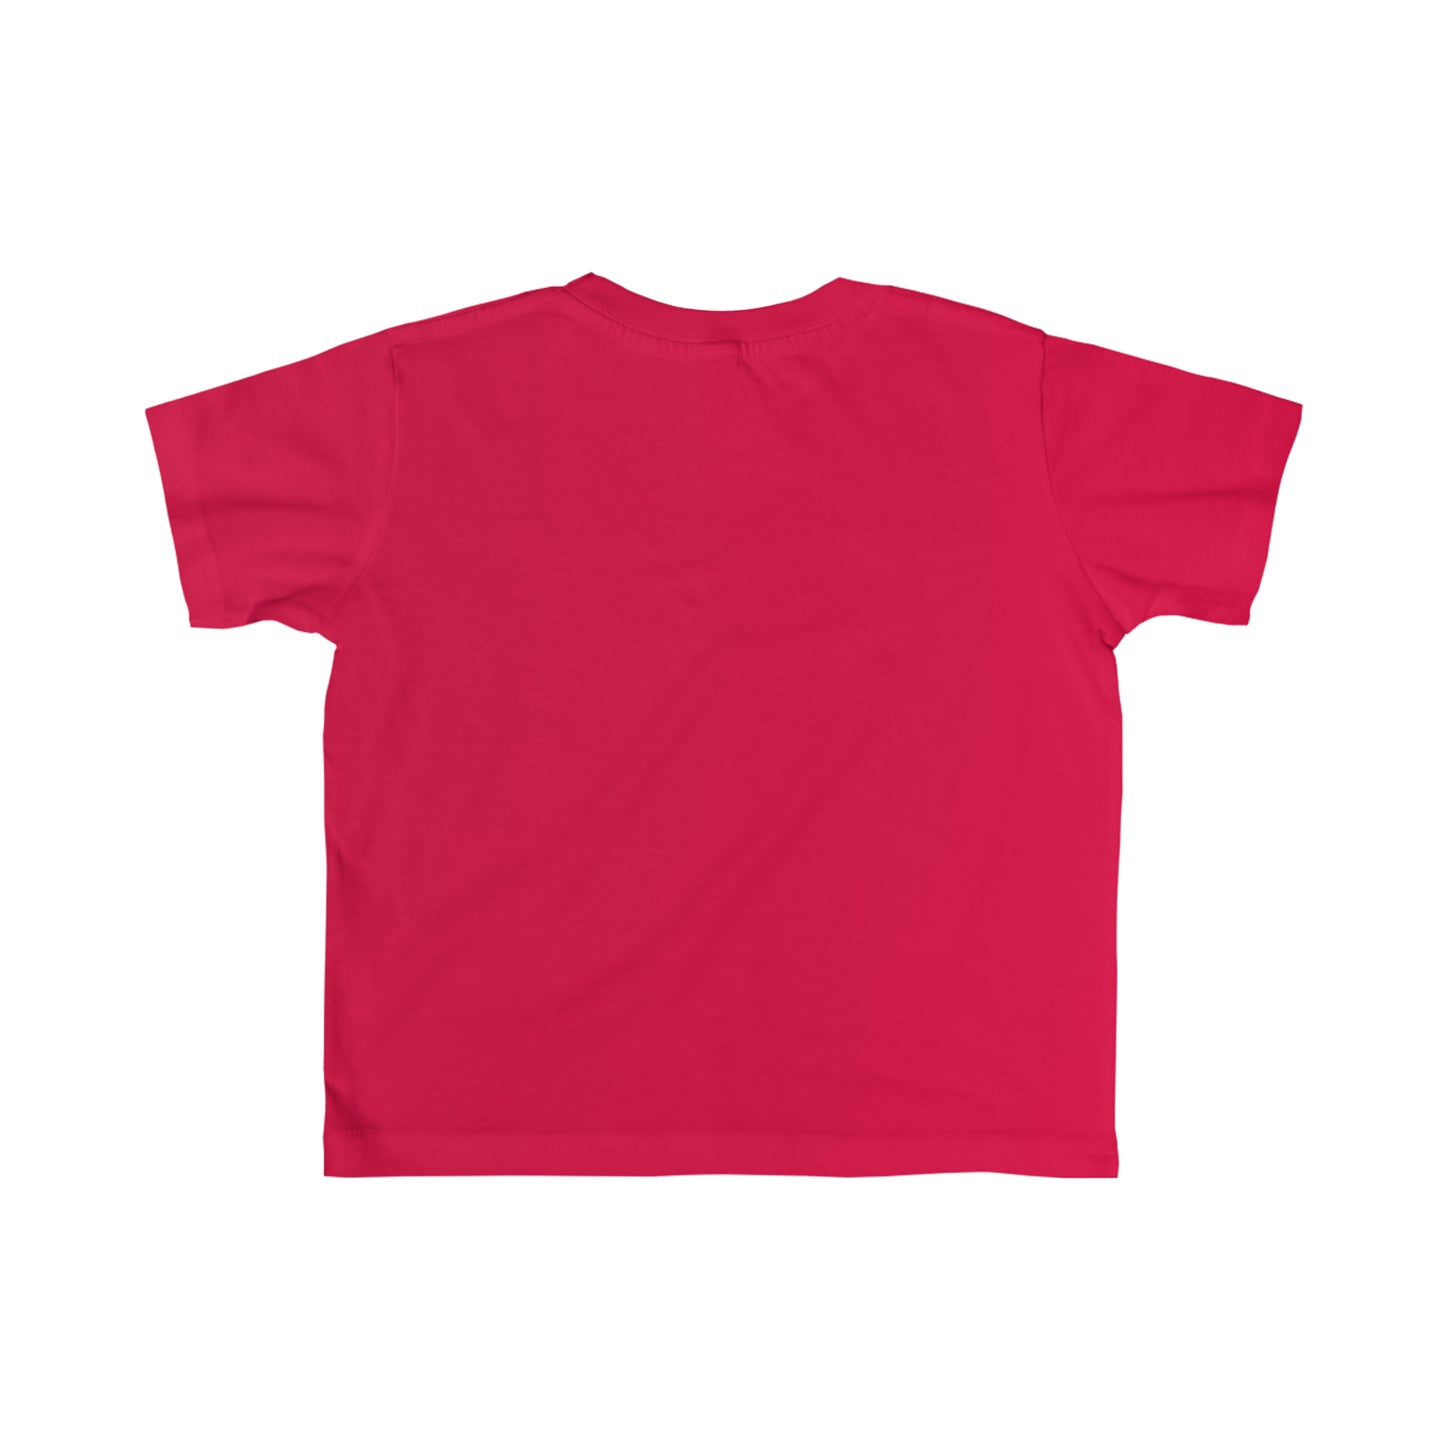 "ARMY PO AKO" Girl Toddler's Fine Jersey Tee